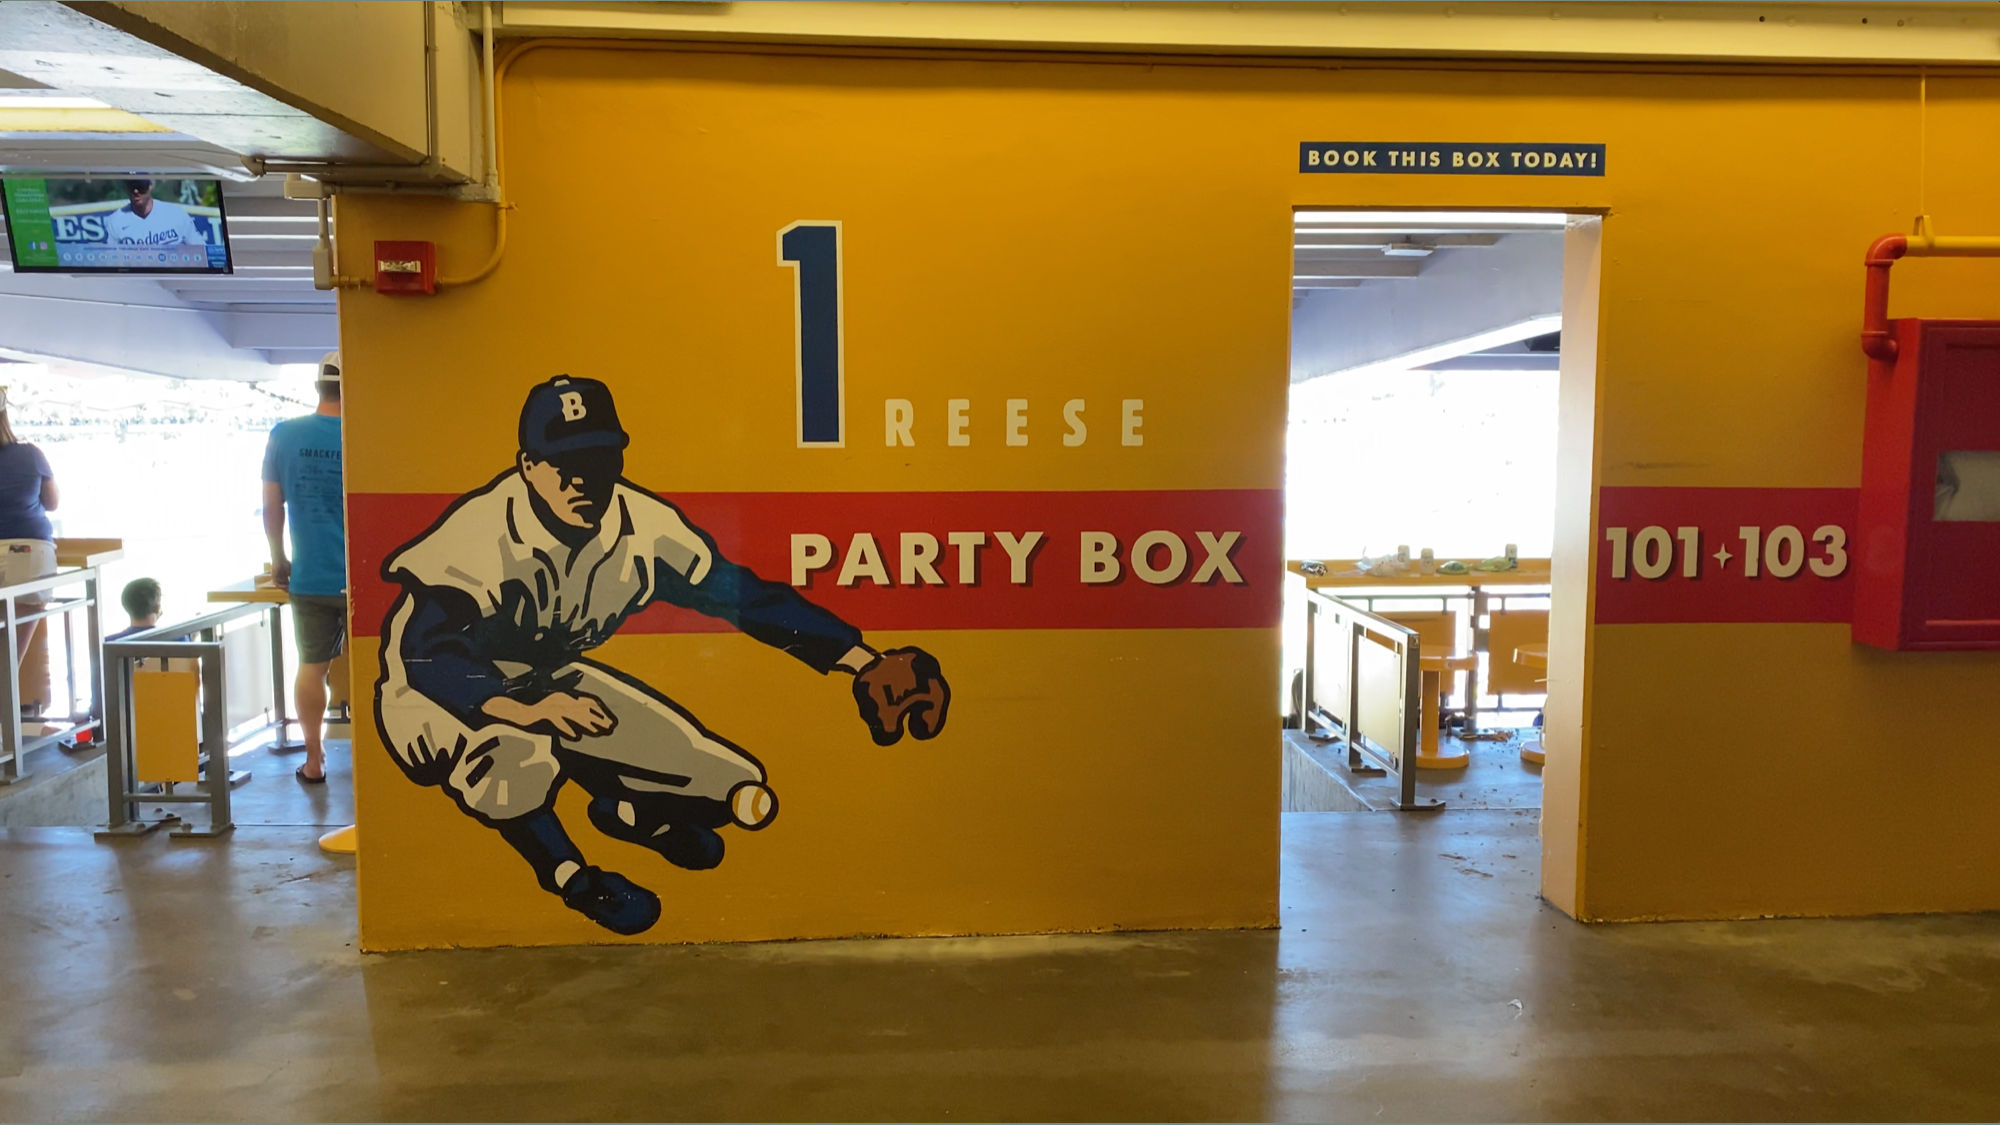 Pee Wee Reese Party Box 101 103